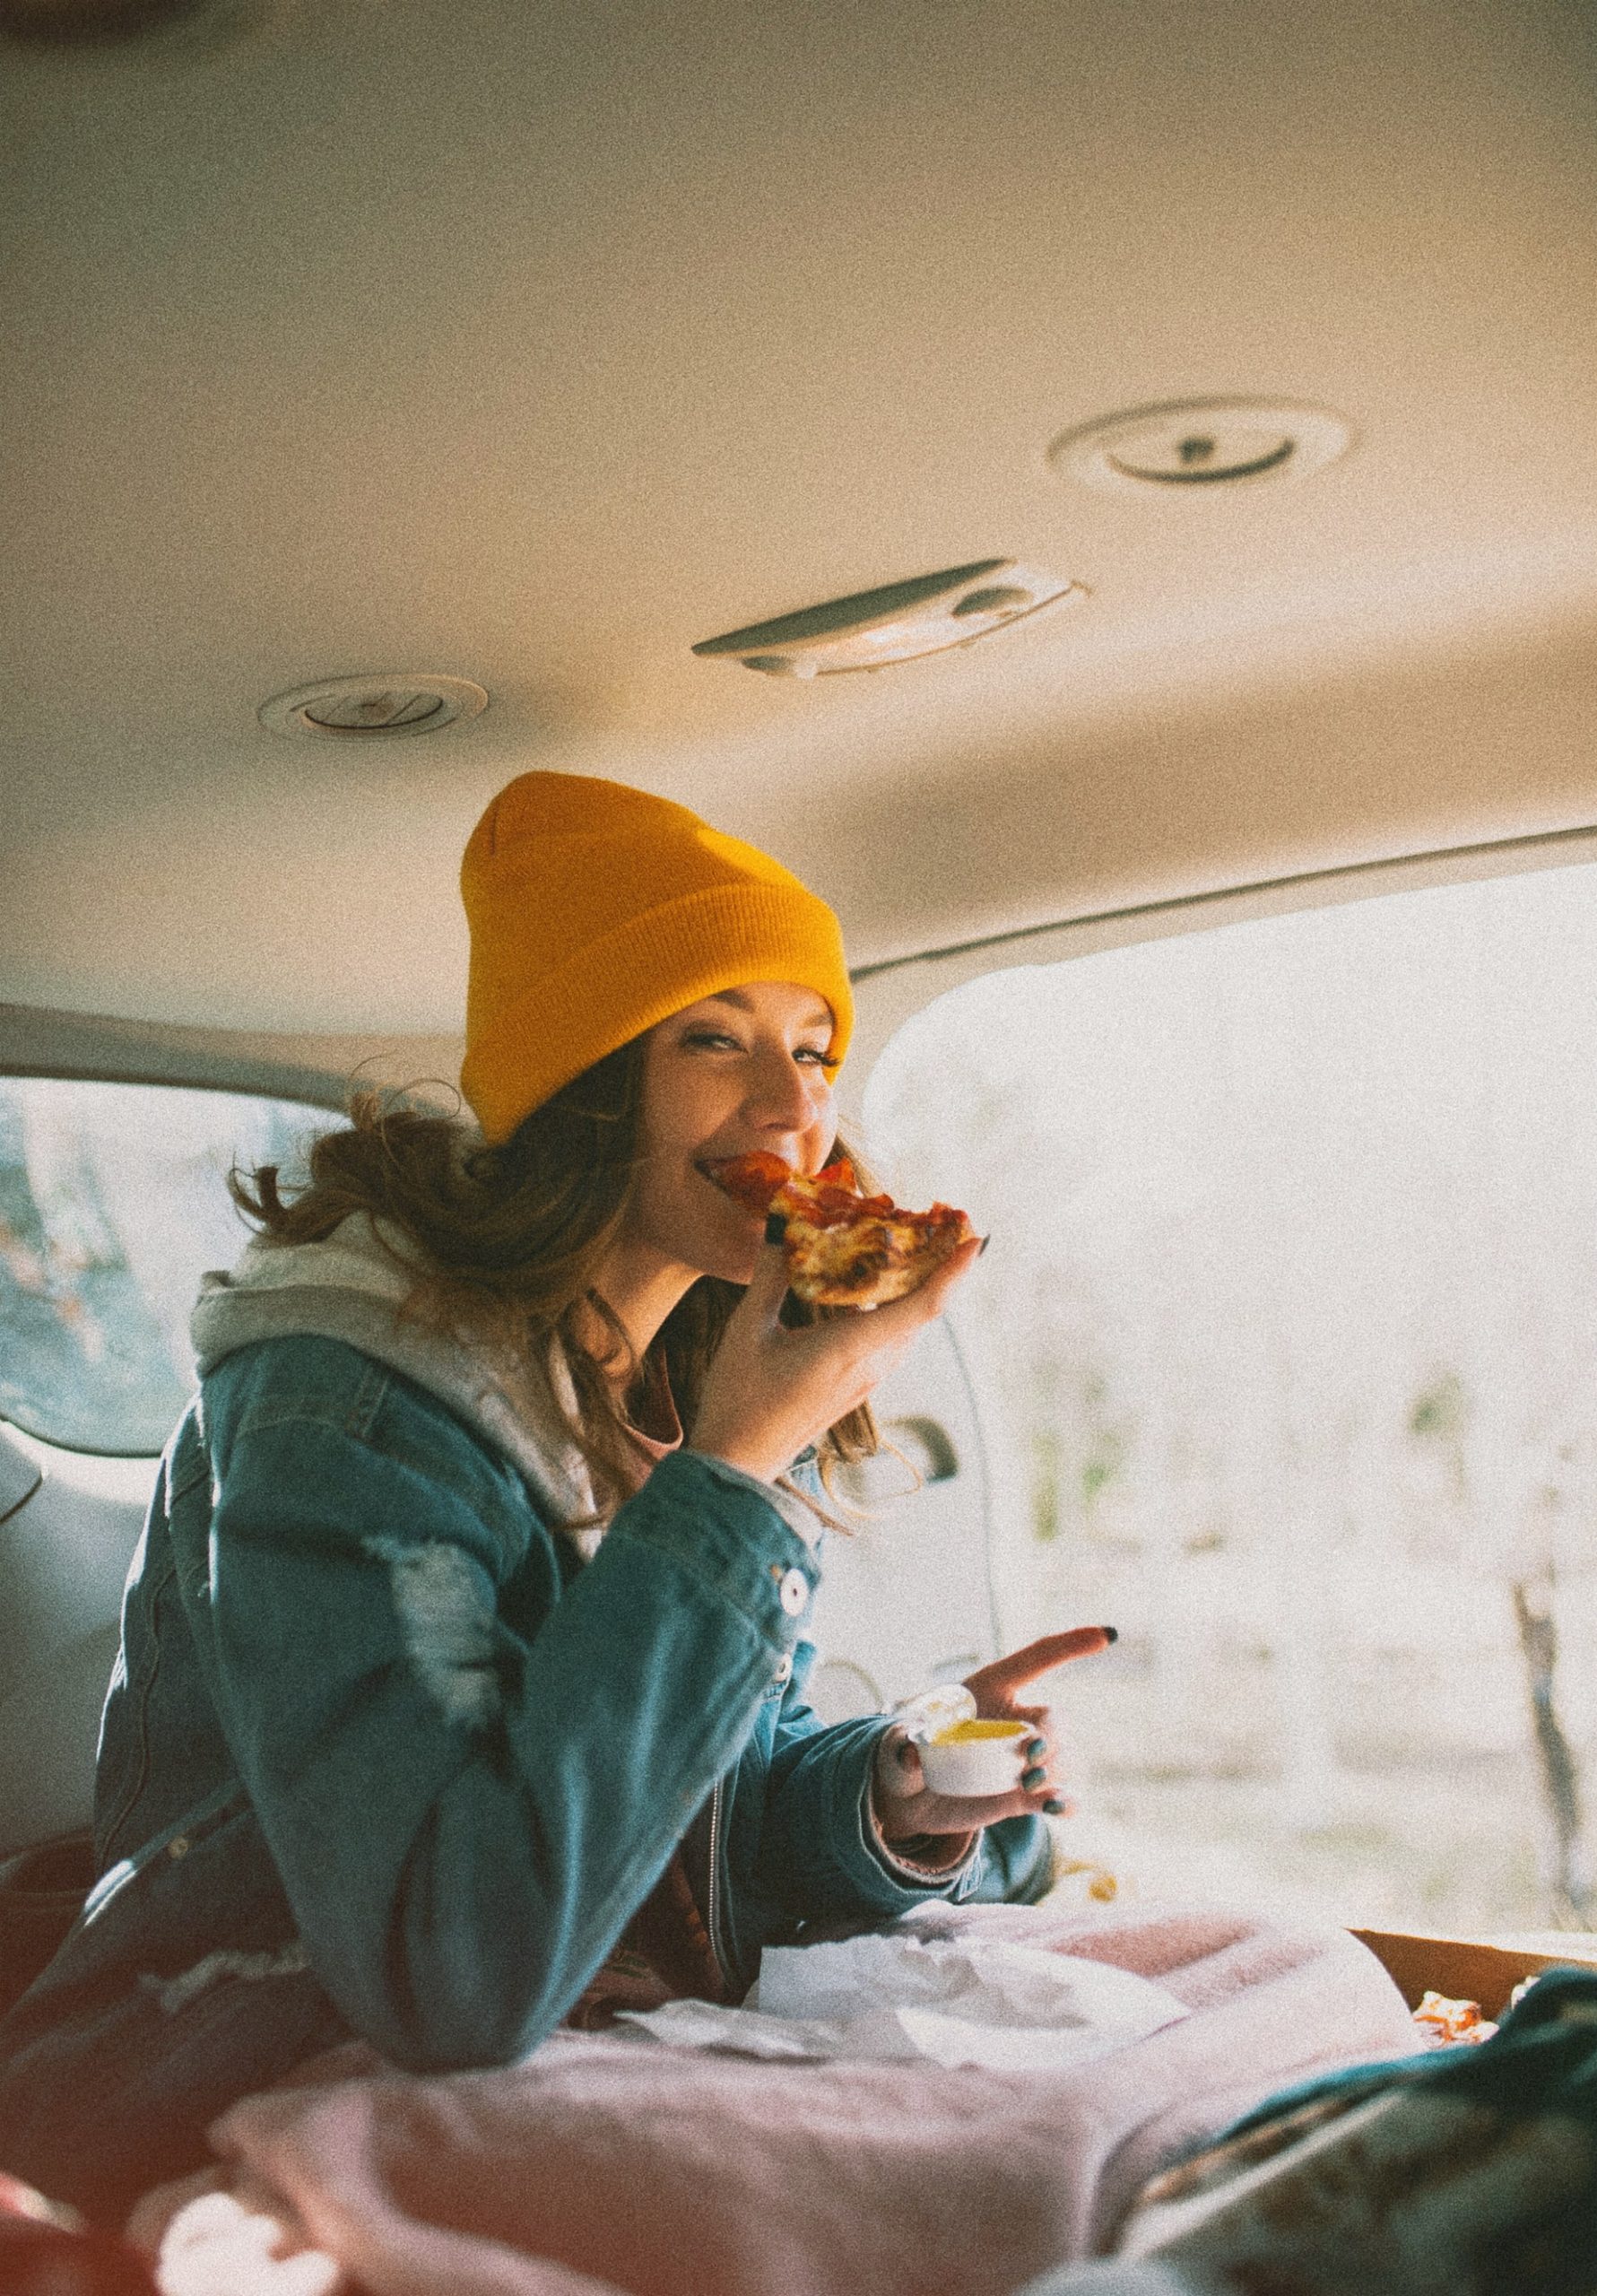 woman eating pizza in a car